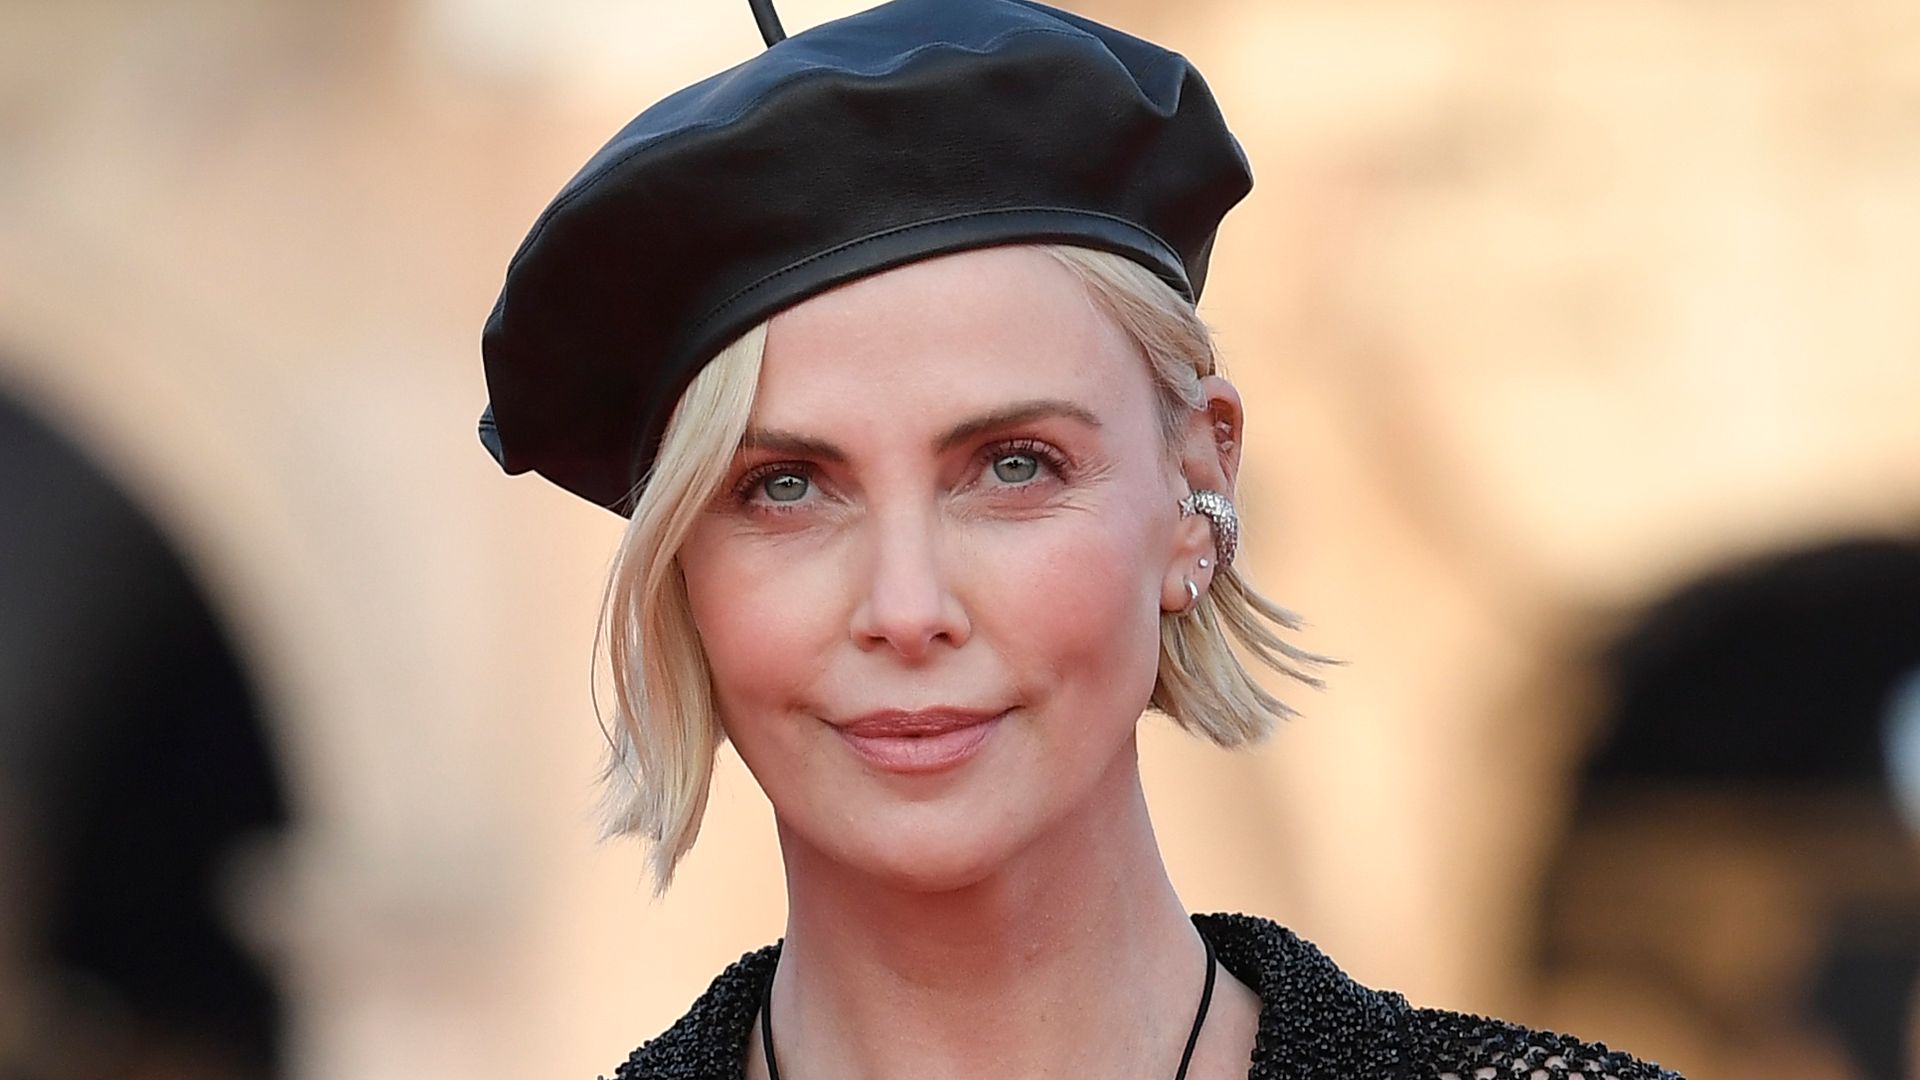 Charlize Theron attends the Fast X film premiere, the tenth film in the Fast & Furious Saga, at Colosseum  in Rome